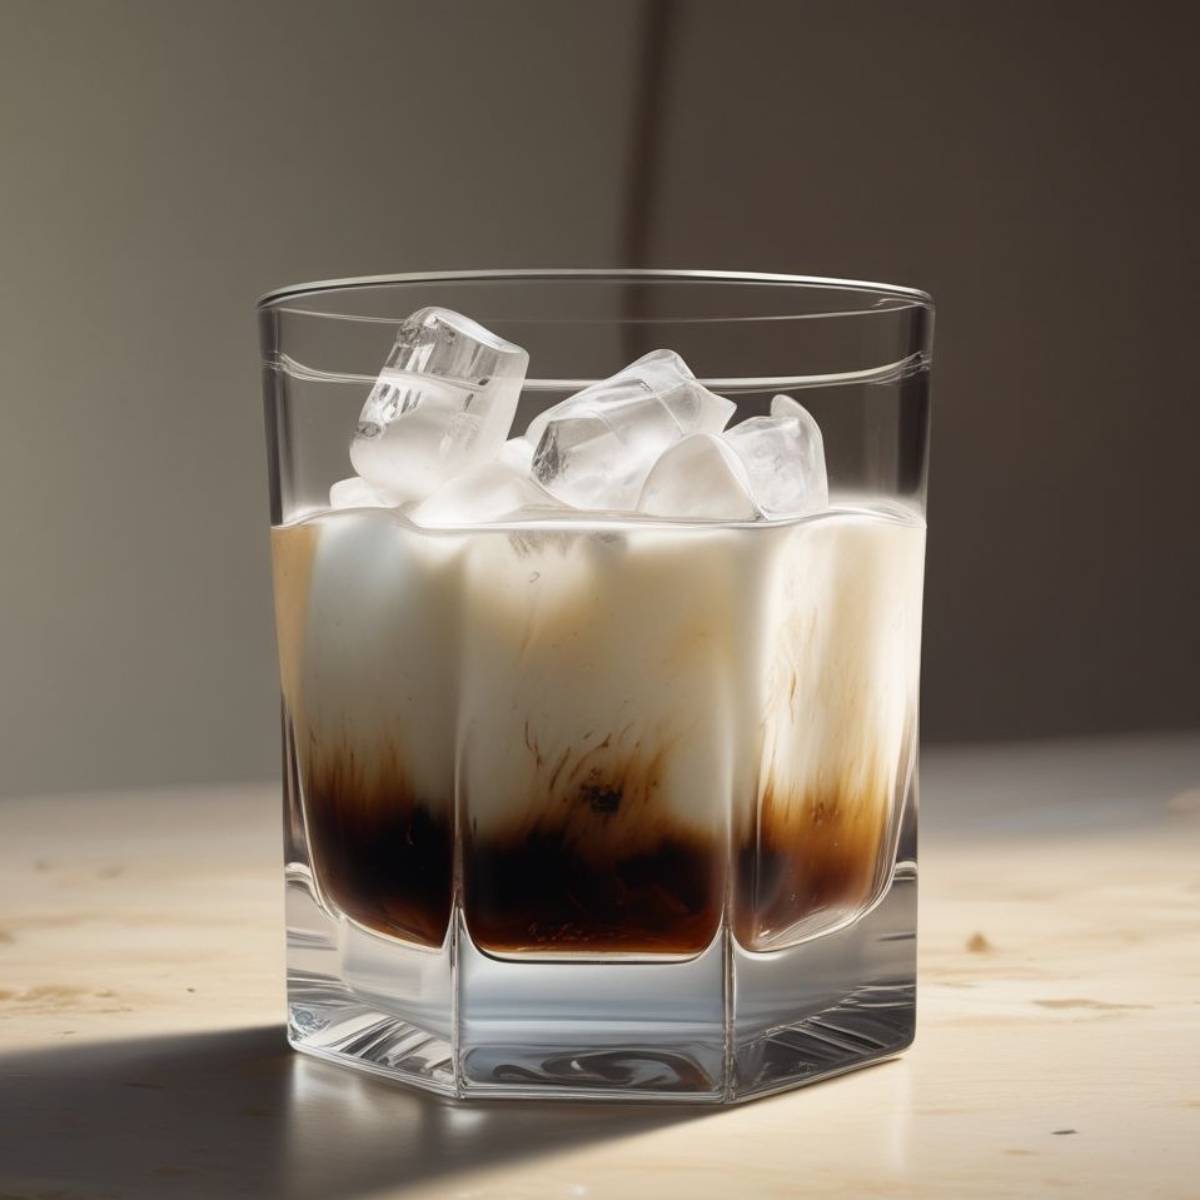 How 'The Big Lebowski' Made The White Russian A Cult Classic